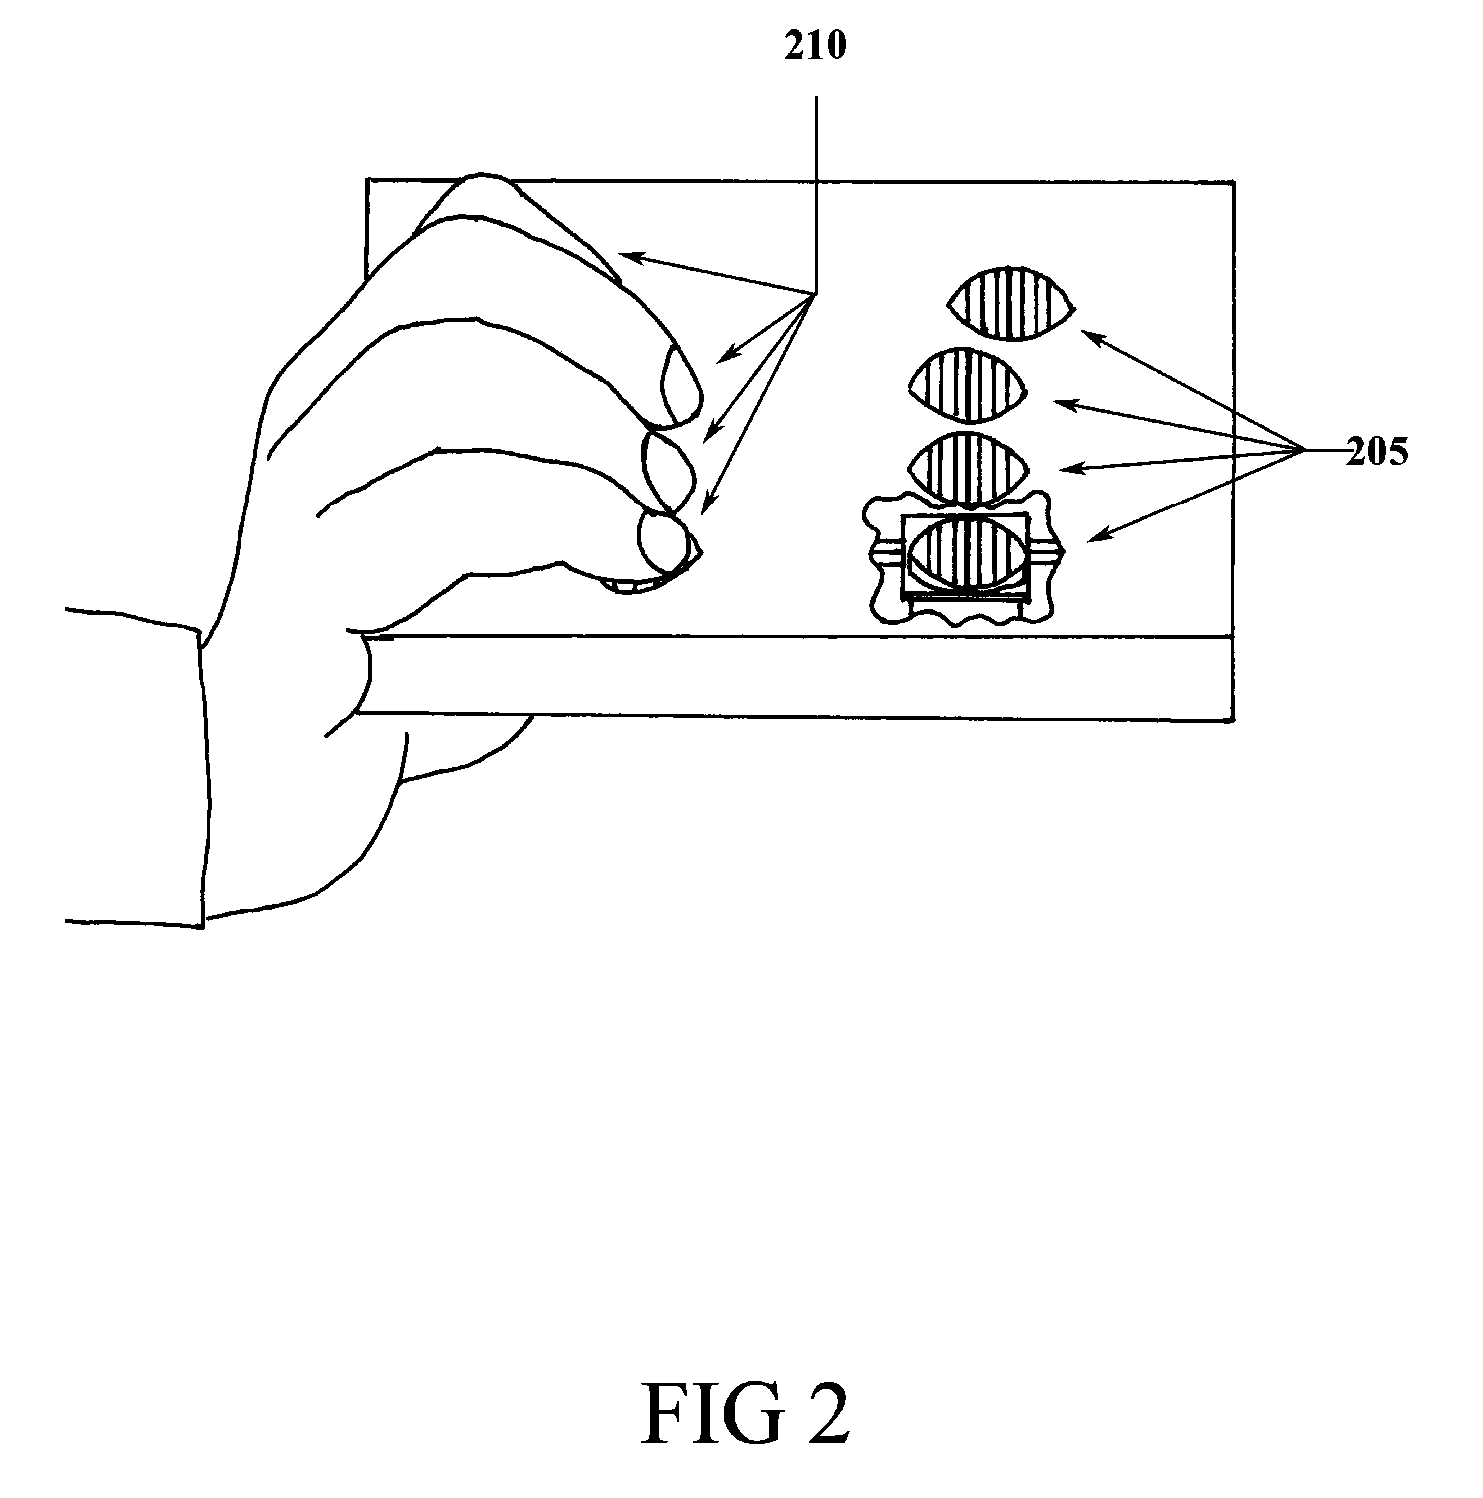 Rapid Typing System for a Hand-held Electronic Device